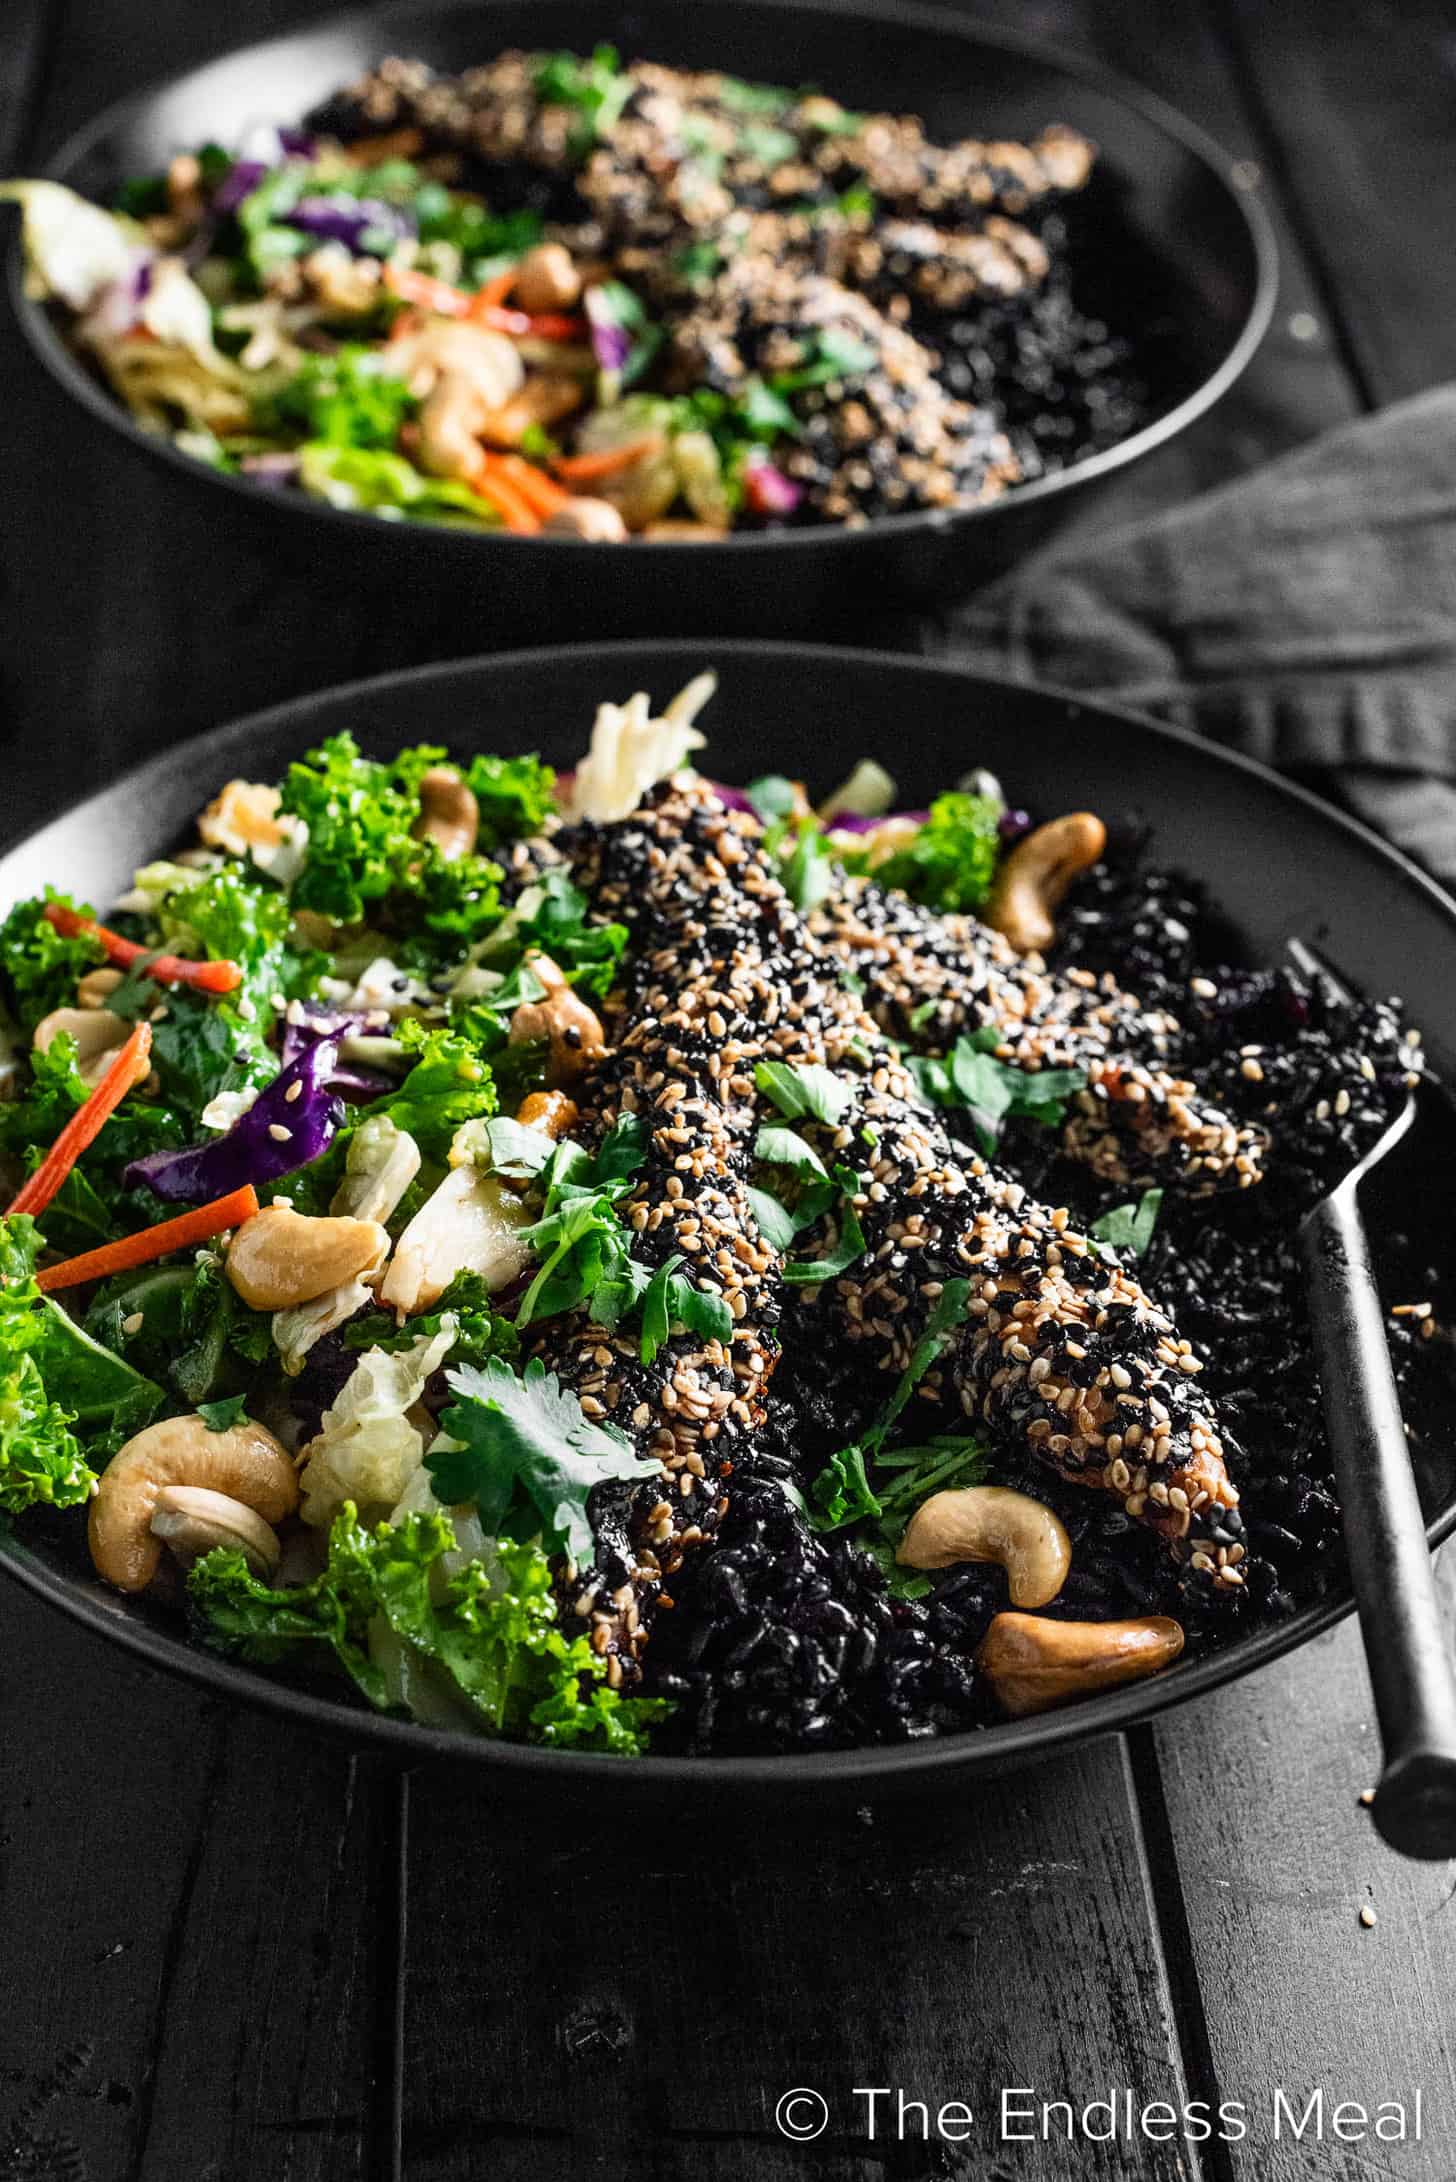 A Sesame Chicken Bowl with salad.